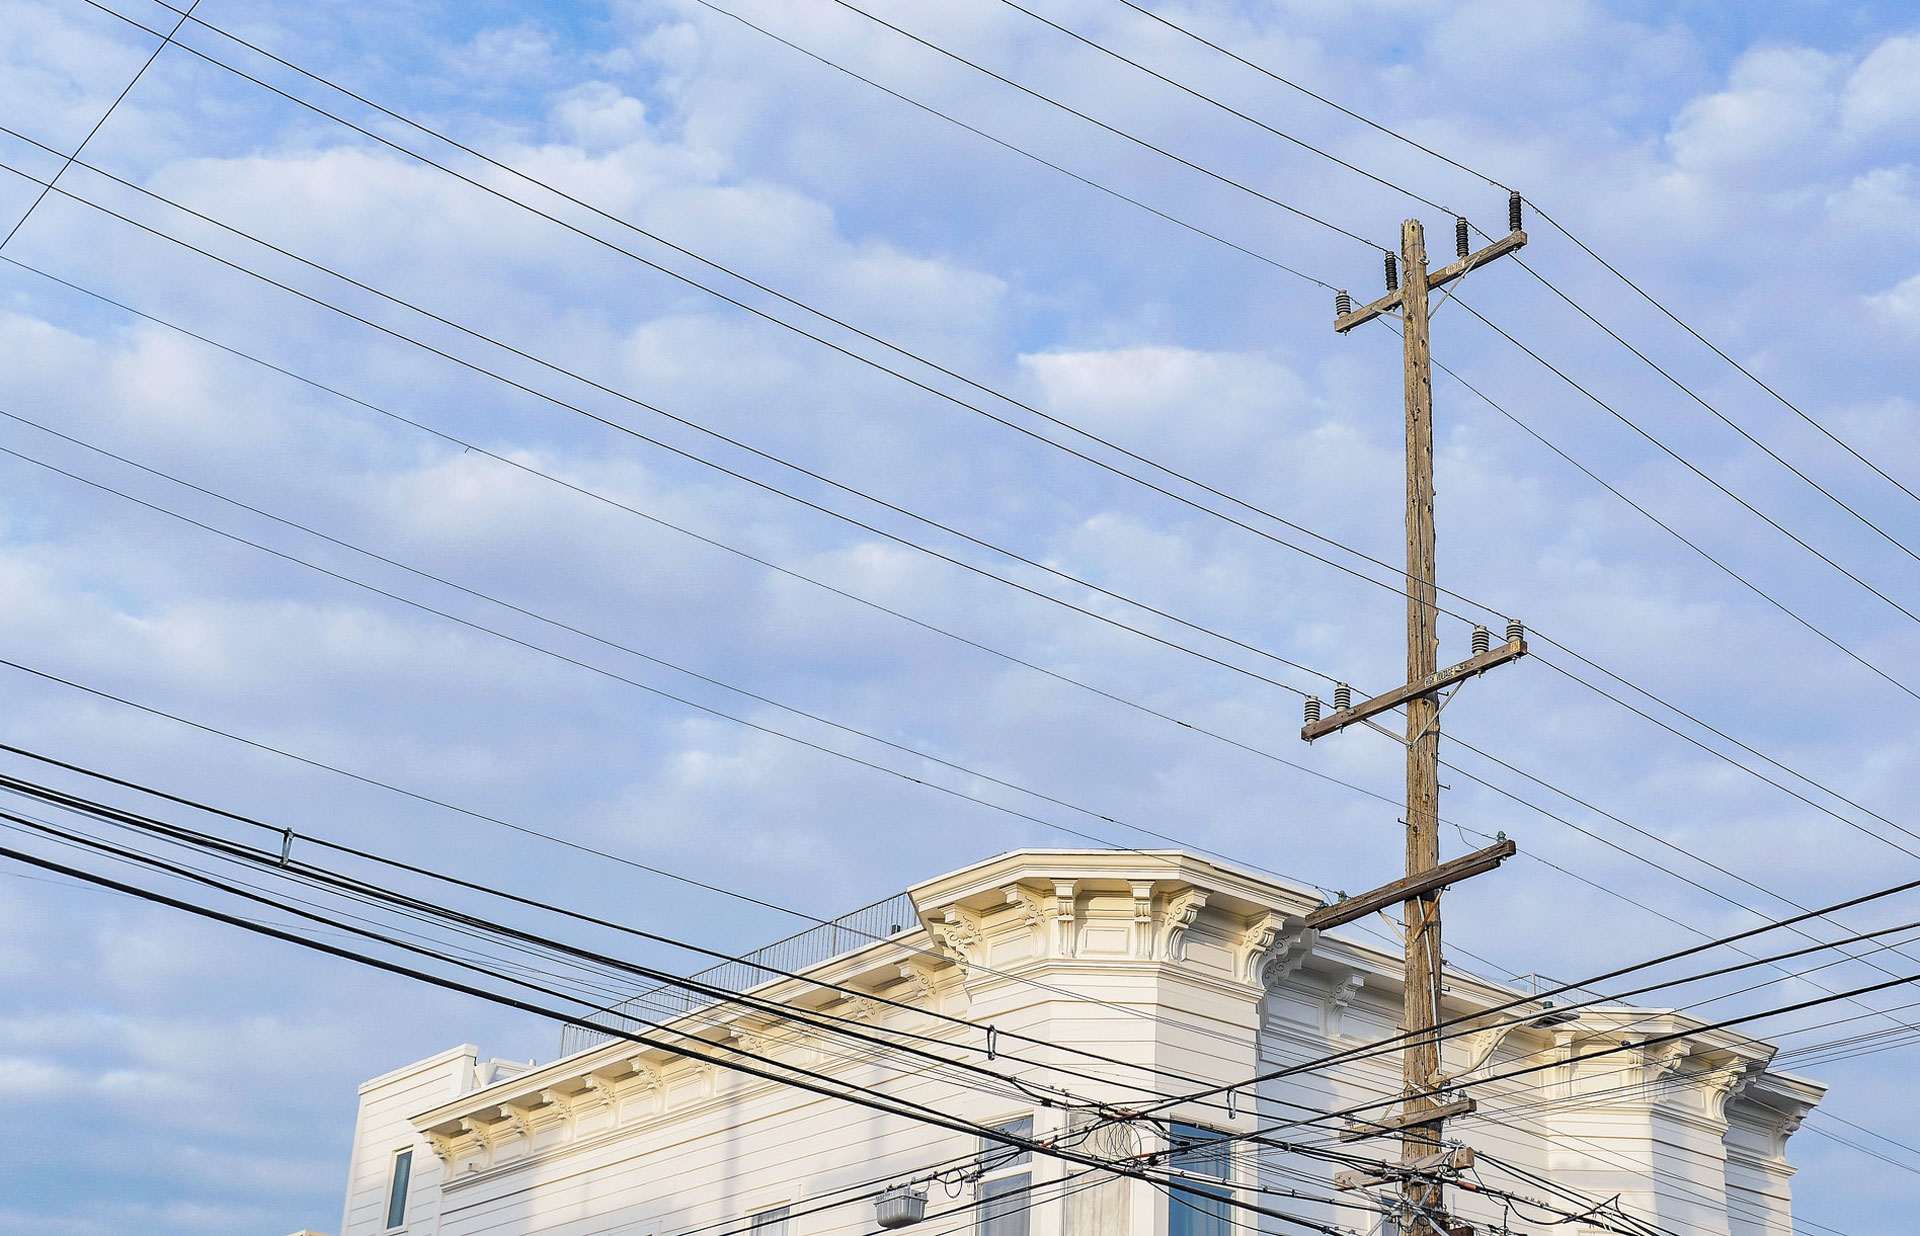 A photo shows primarily a wooden power pole with utility lines crossing the sky, and the outline of the top of a building that looks like a San Francisco victorian in the background